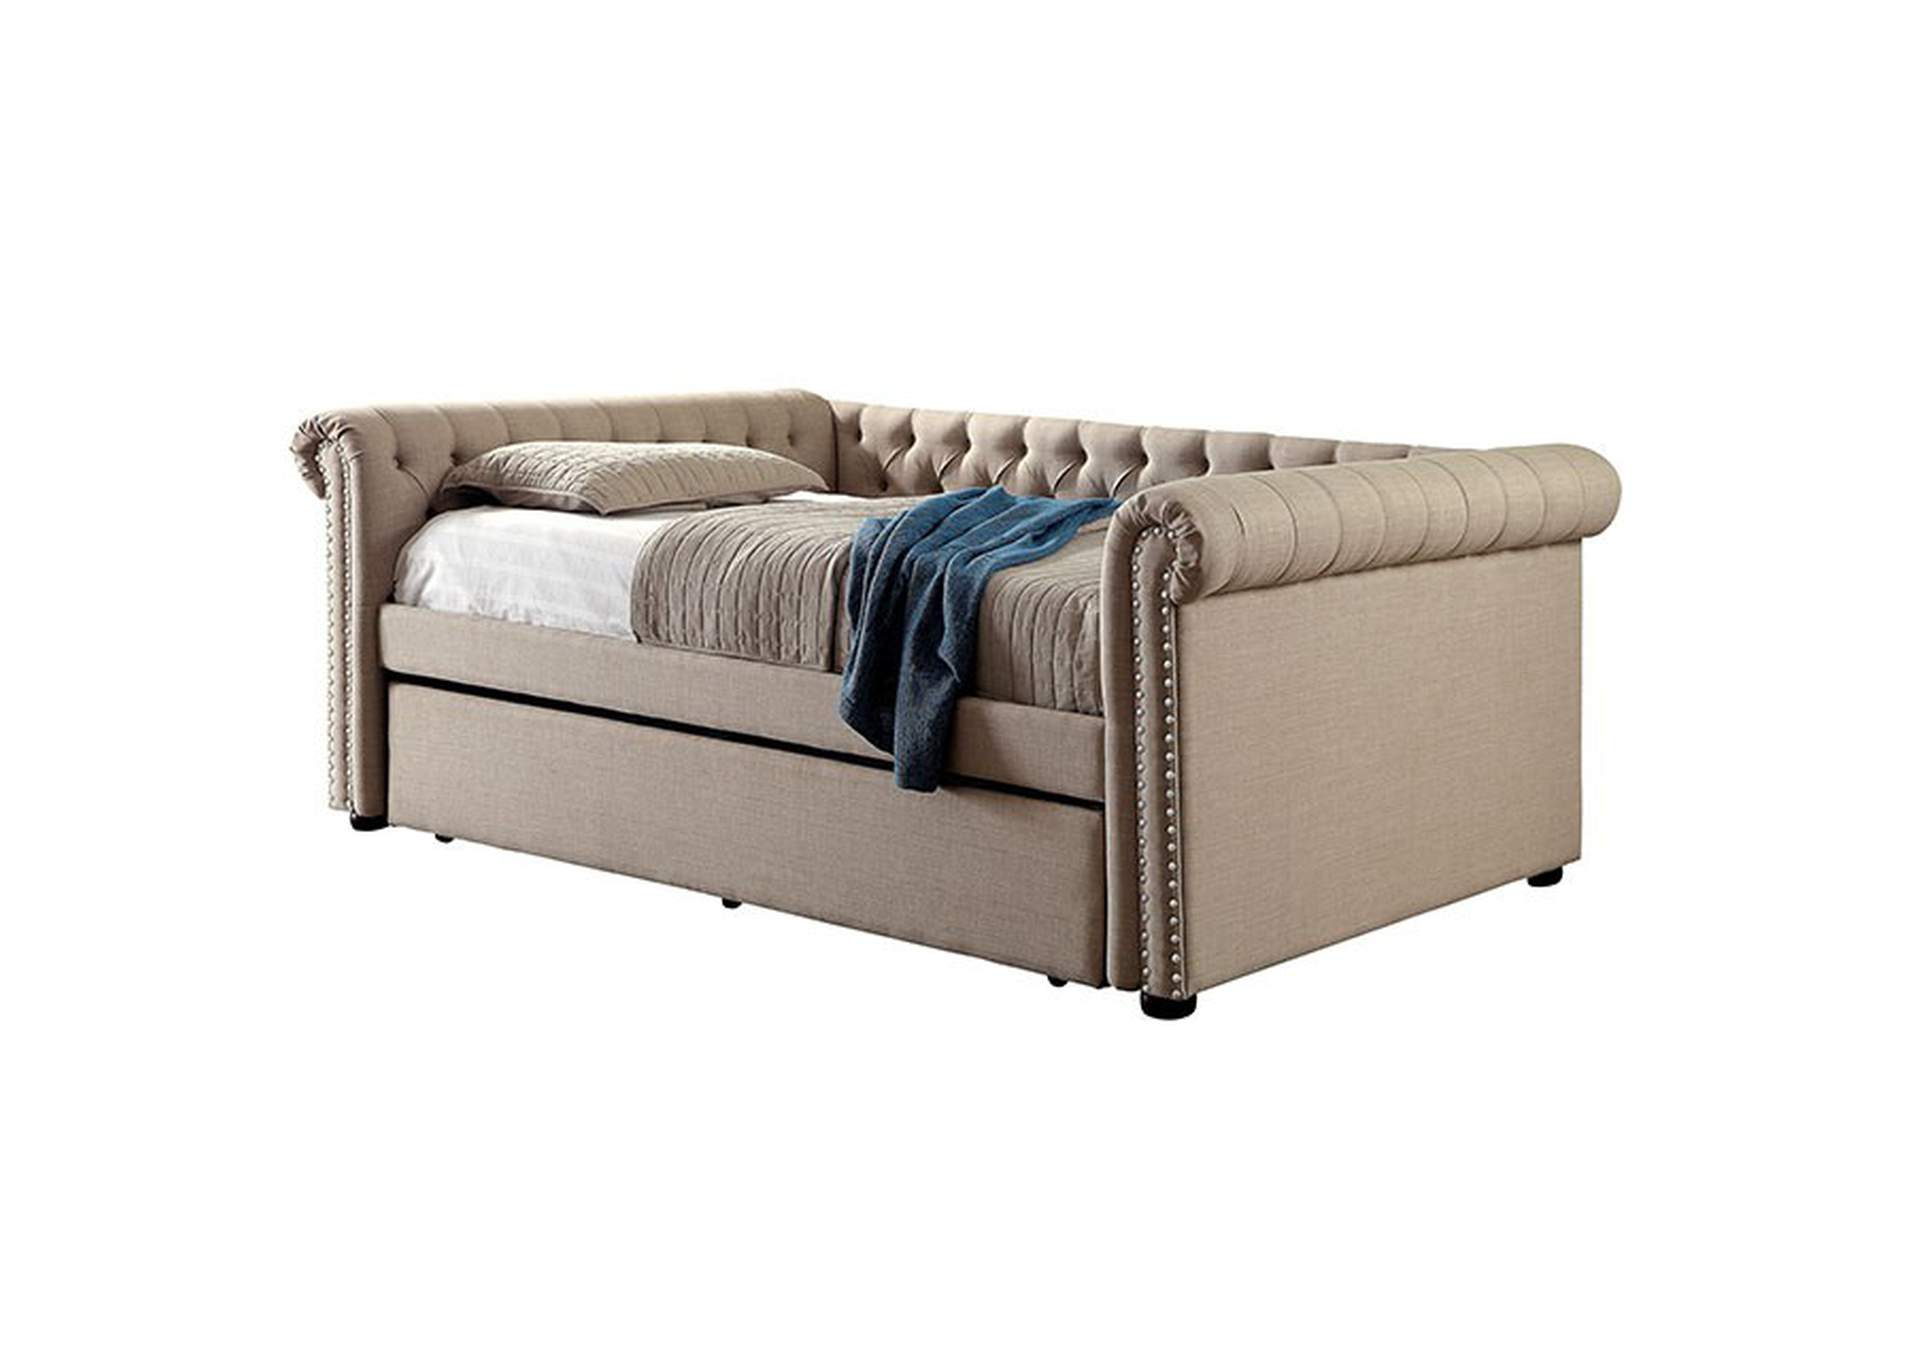 Leanna Daybed w/ Trundle,Furniture of America